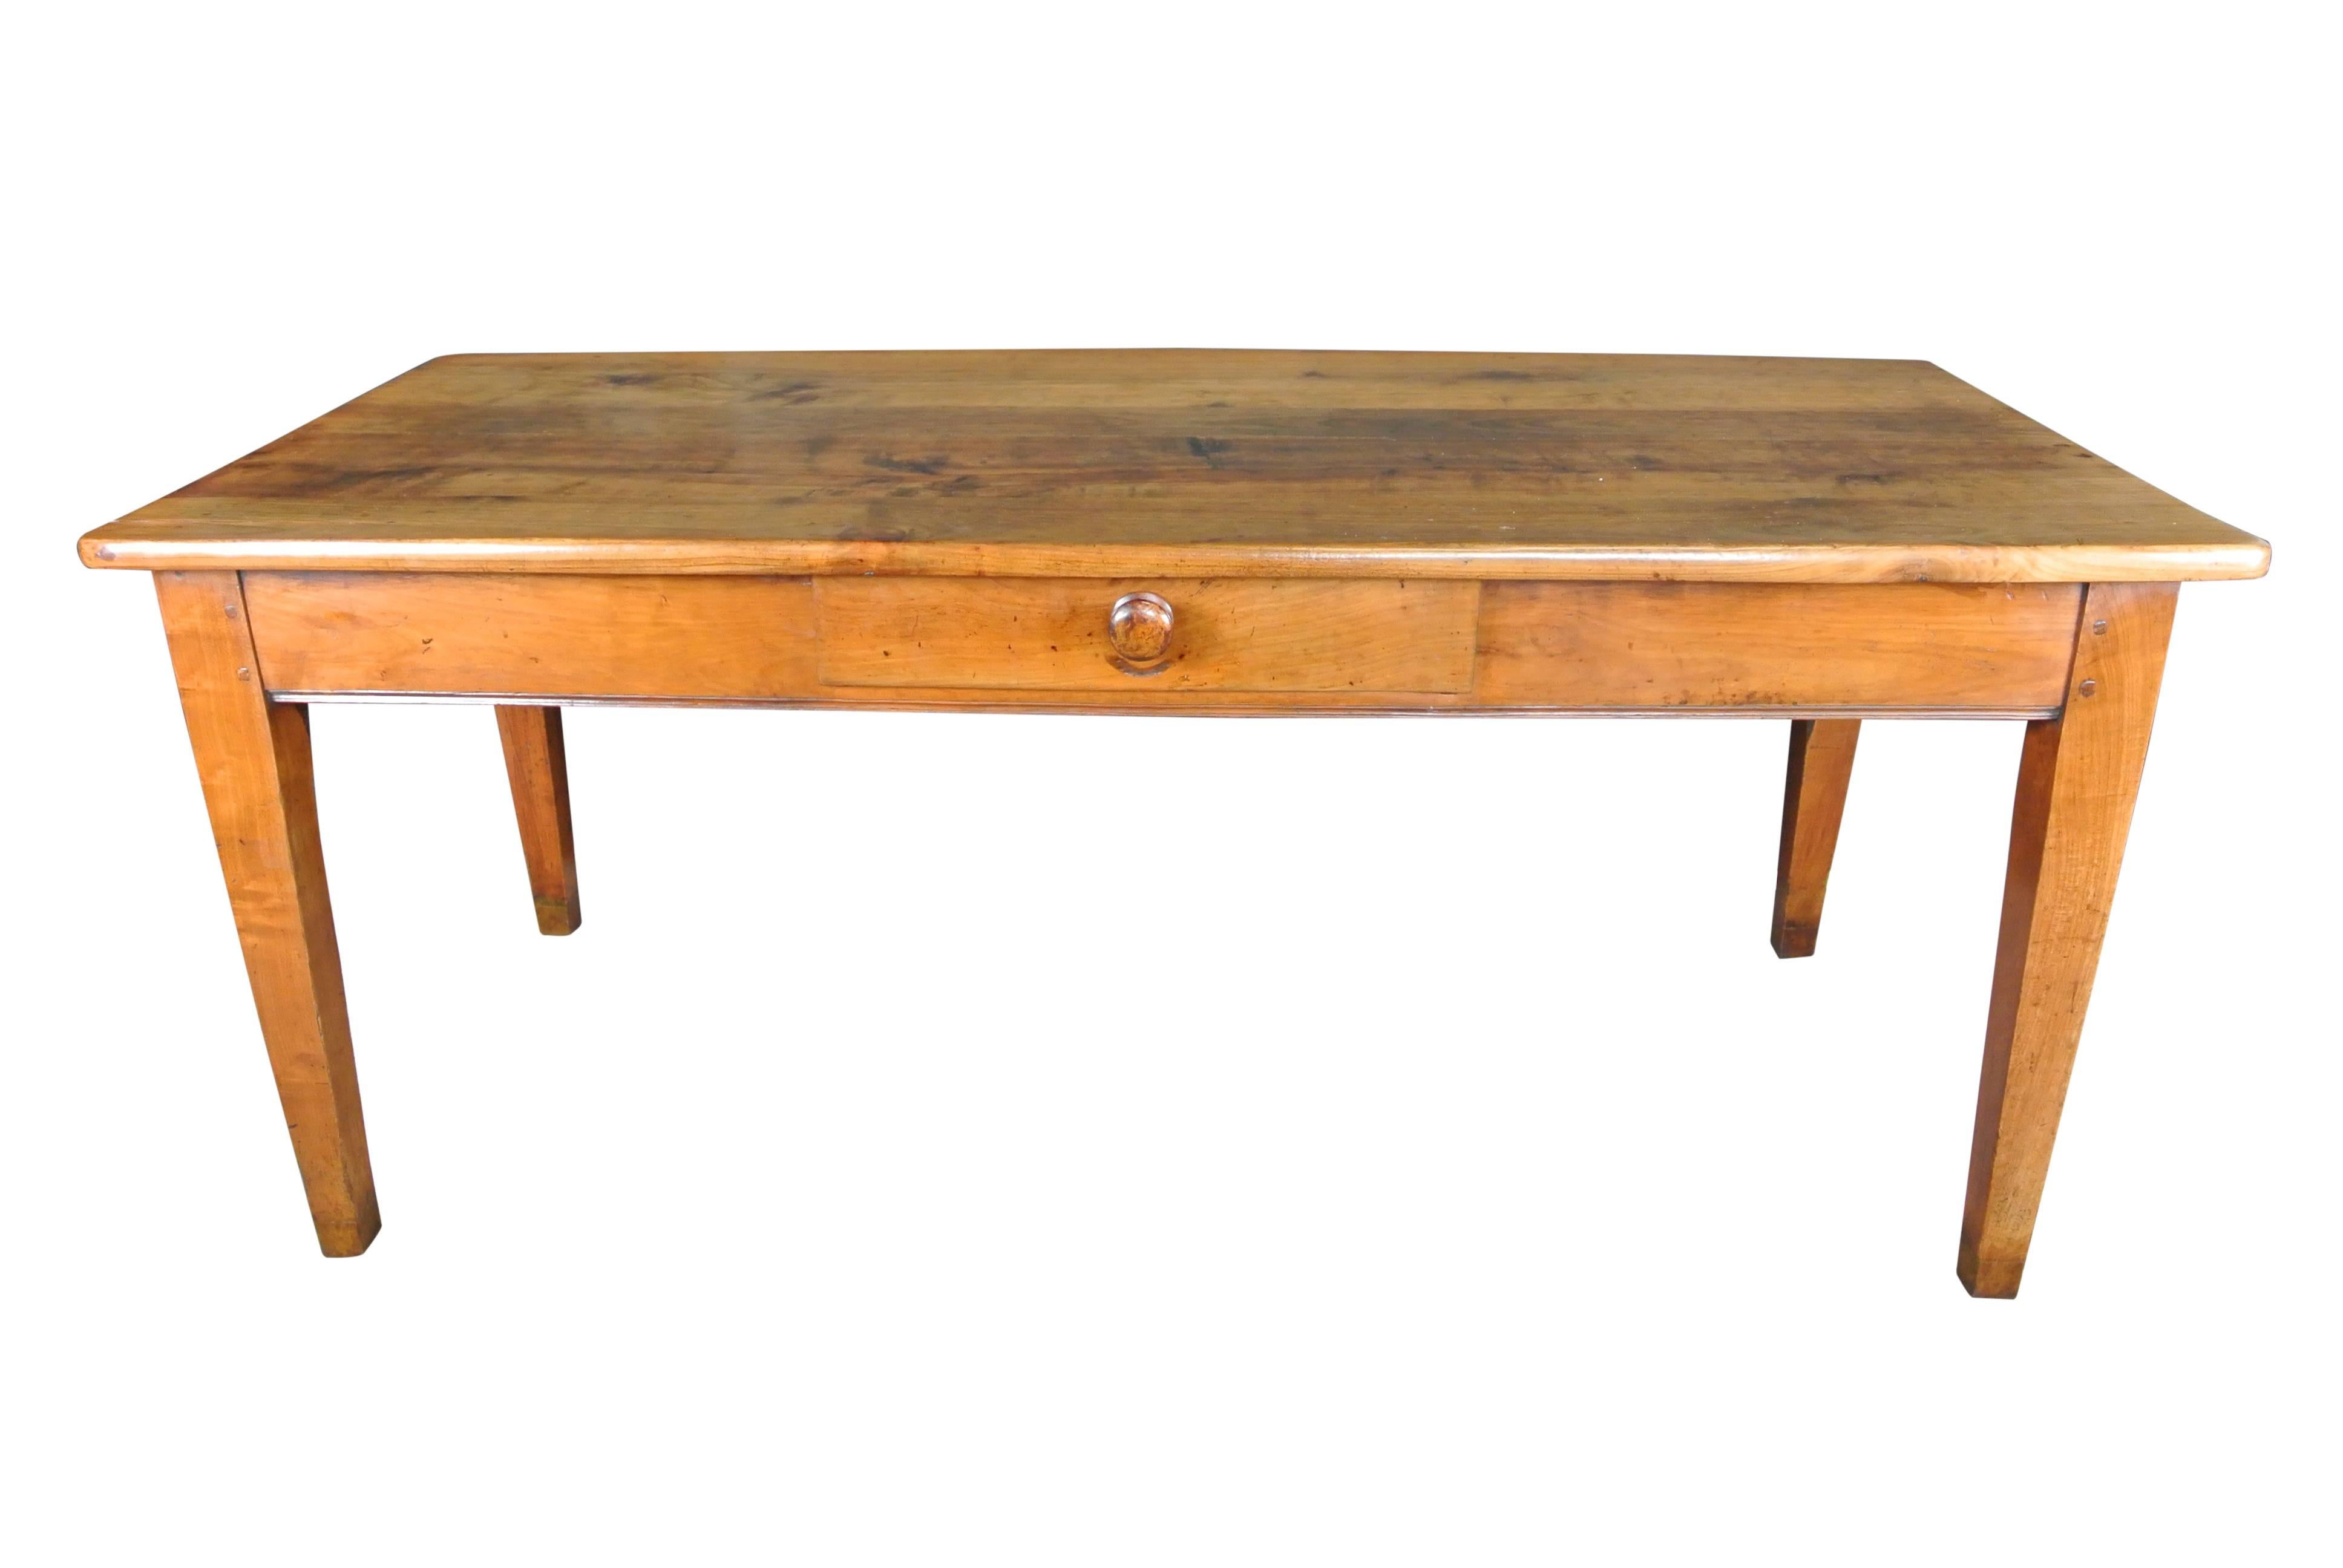 A large beautifully figured French cherrywood farmhouse kitchen table with a central drawer. Extraordinarily good color.